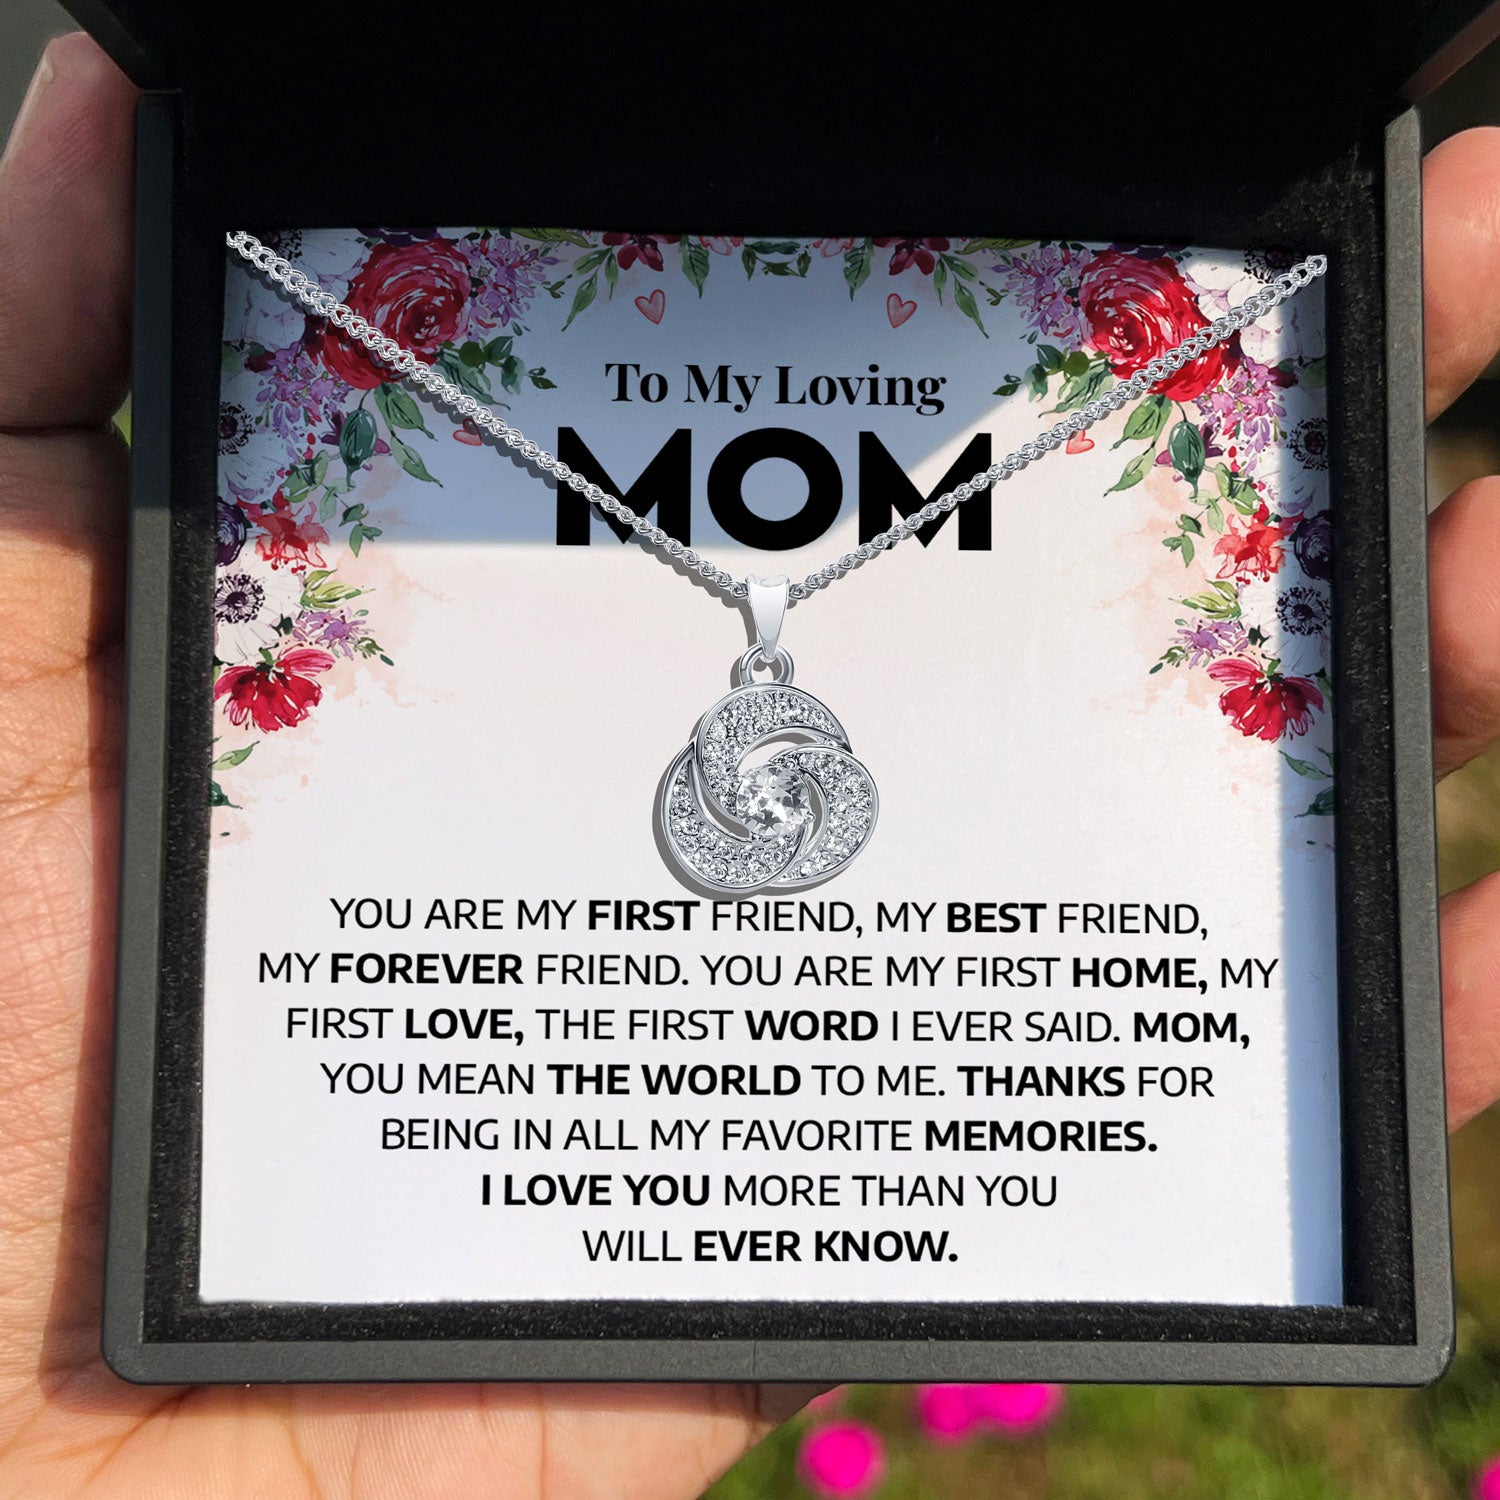 To My Loving Mom - Thanks For Being In All My Favorite Memories - Tryndi Love Knot Necklace